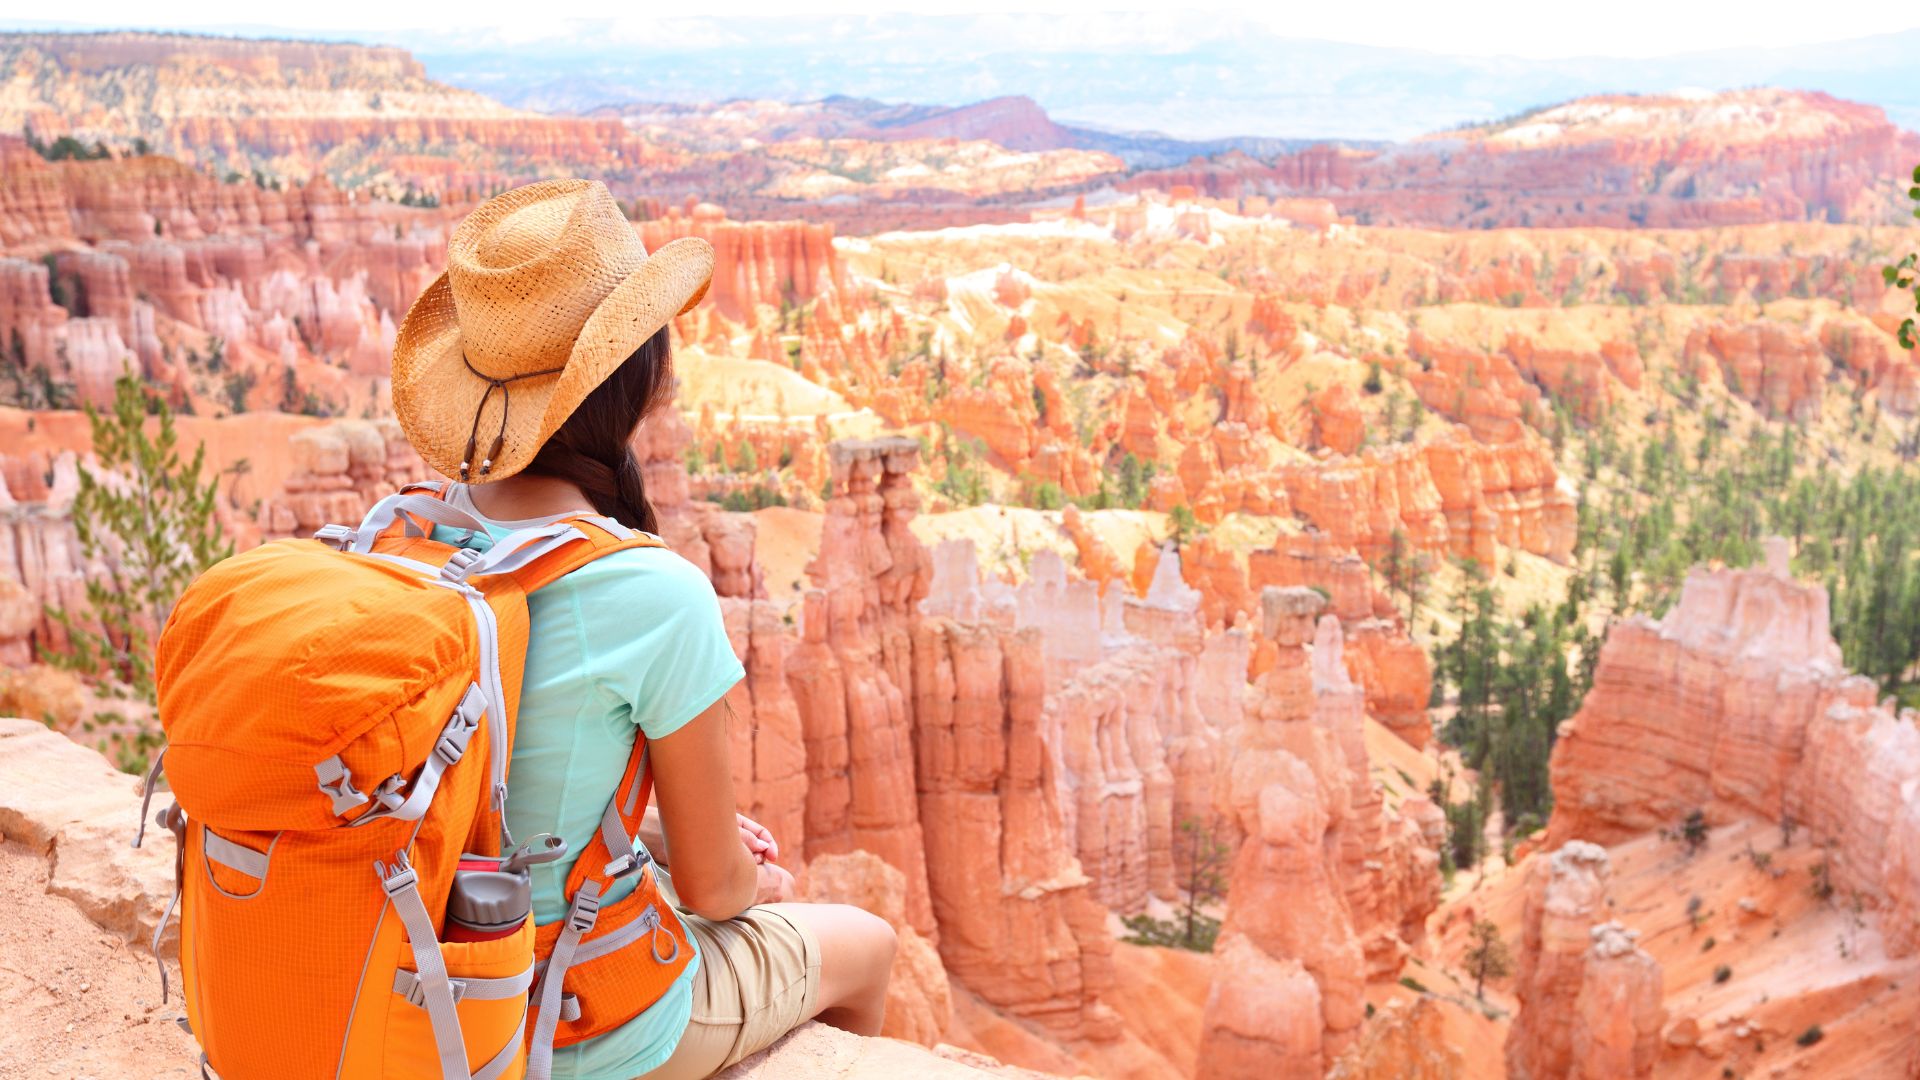 A hiker with a daypack on sits looking out at the bryce canyon hoodoos